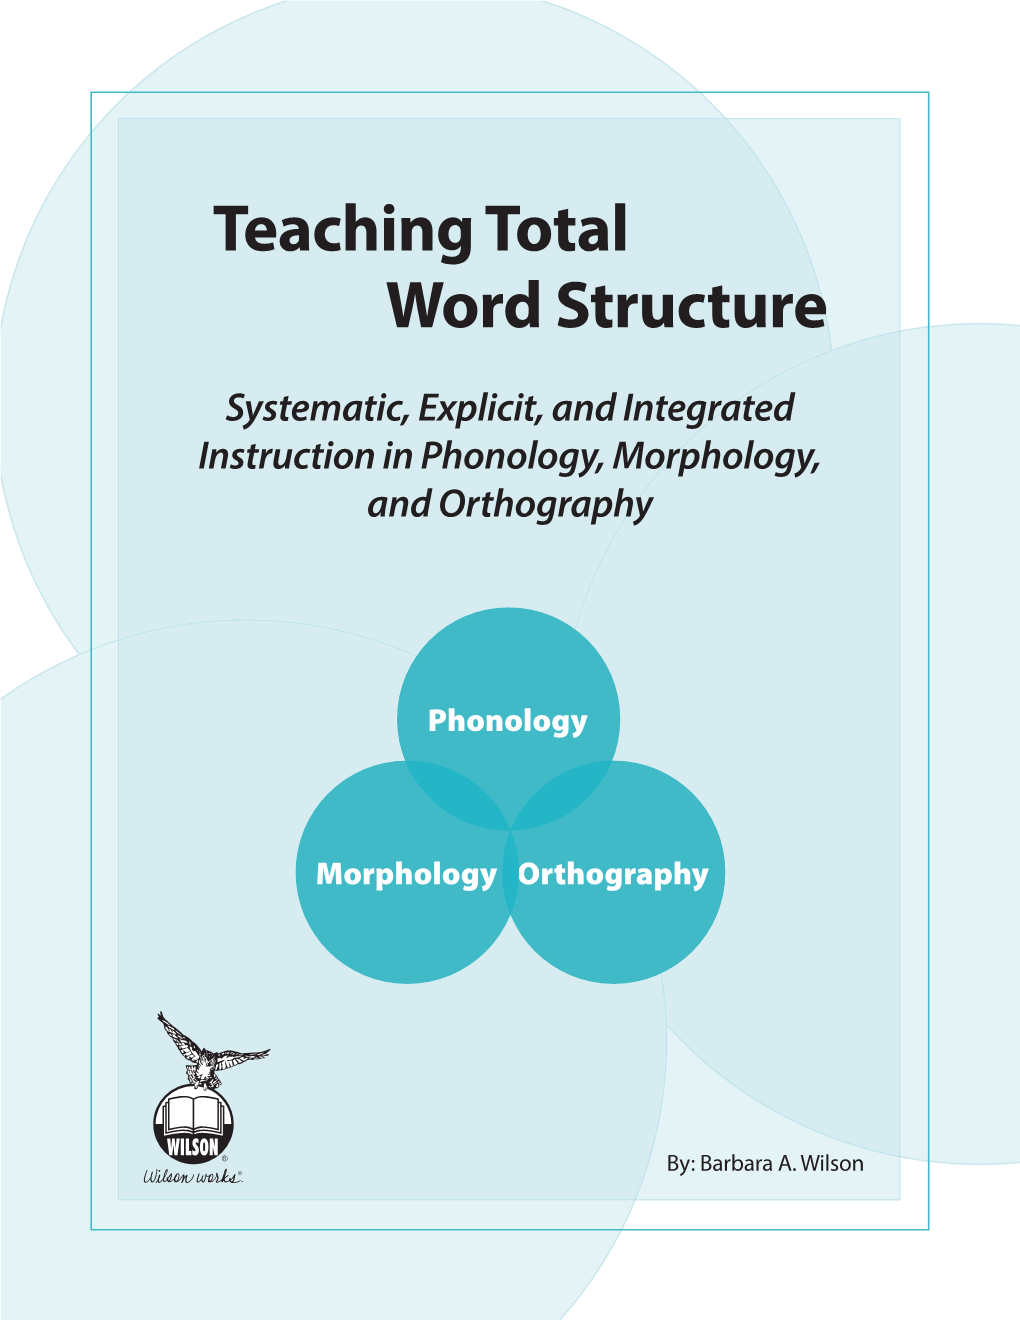 Teaching Total Word Structure